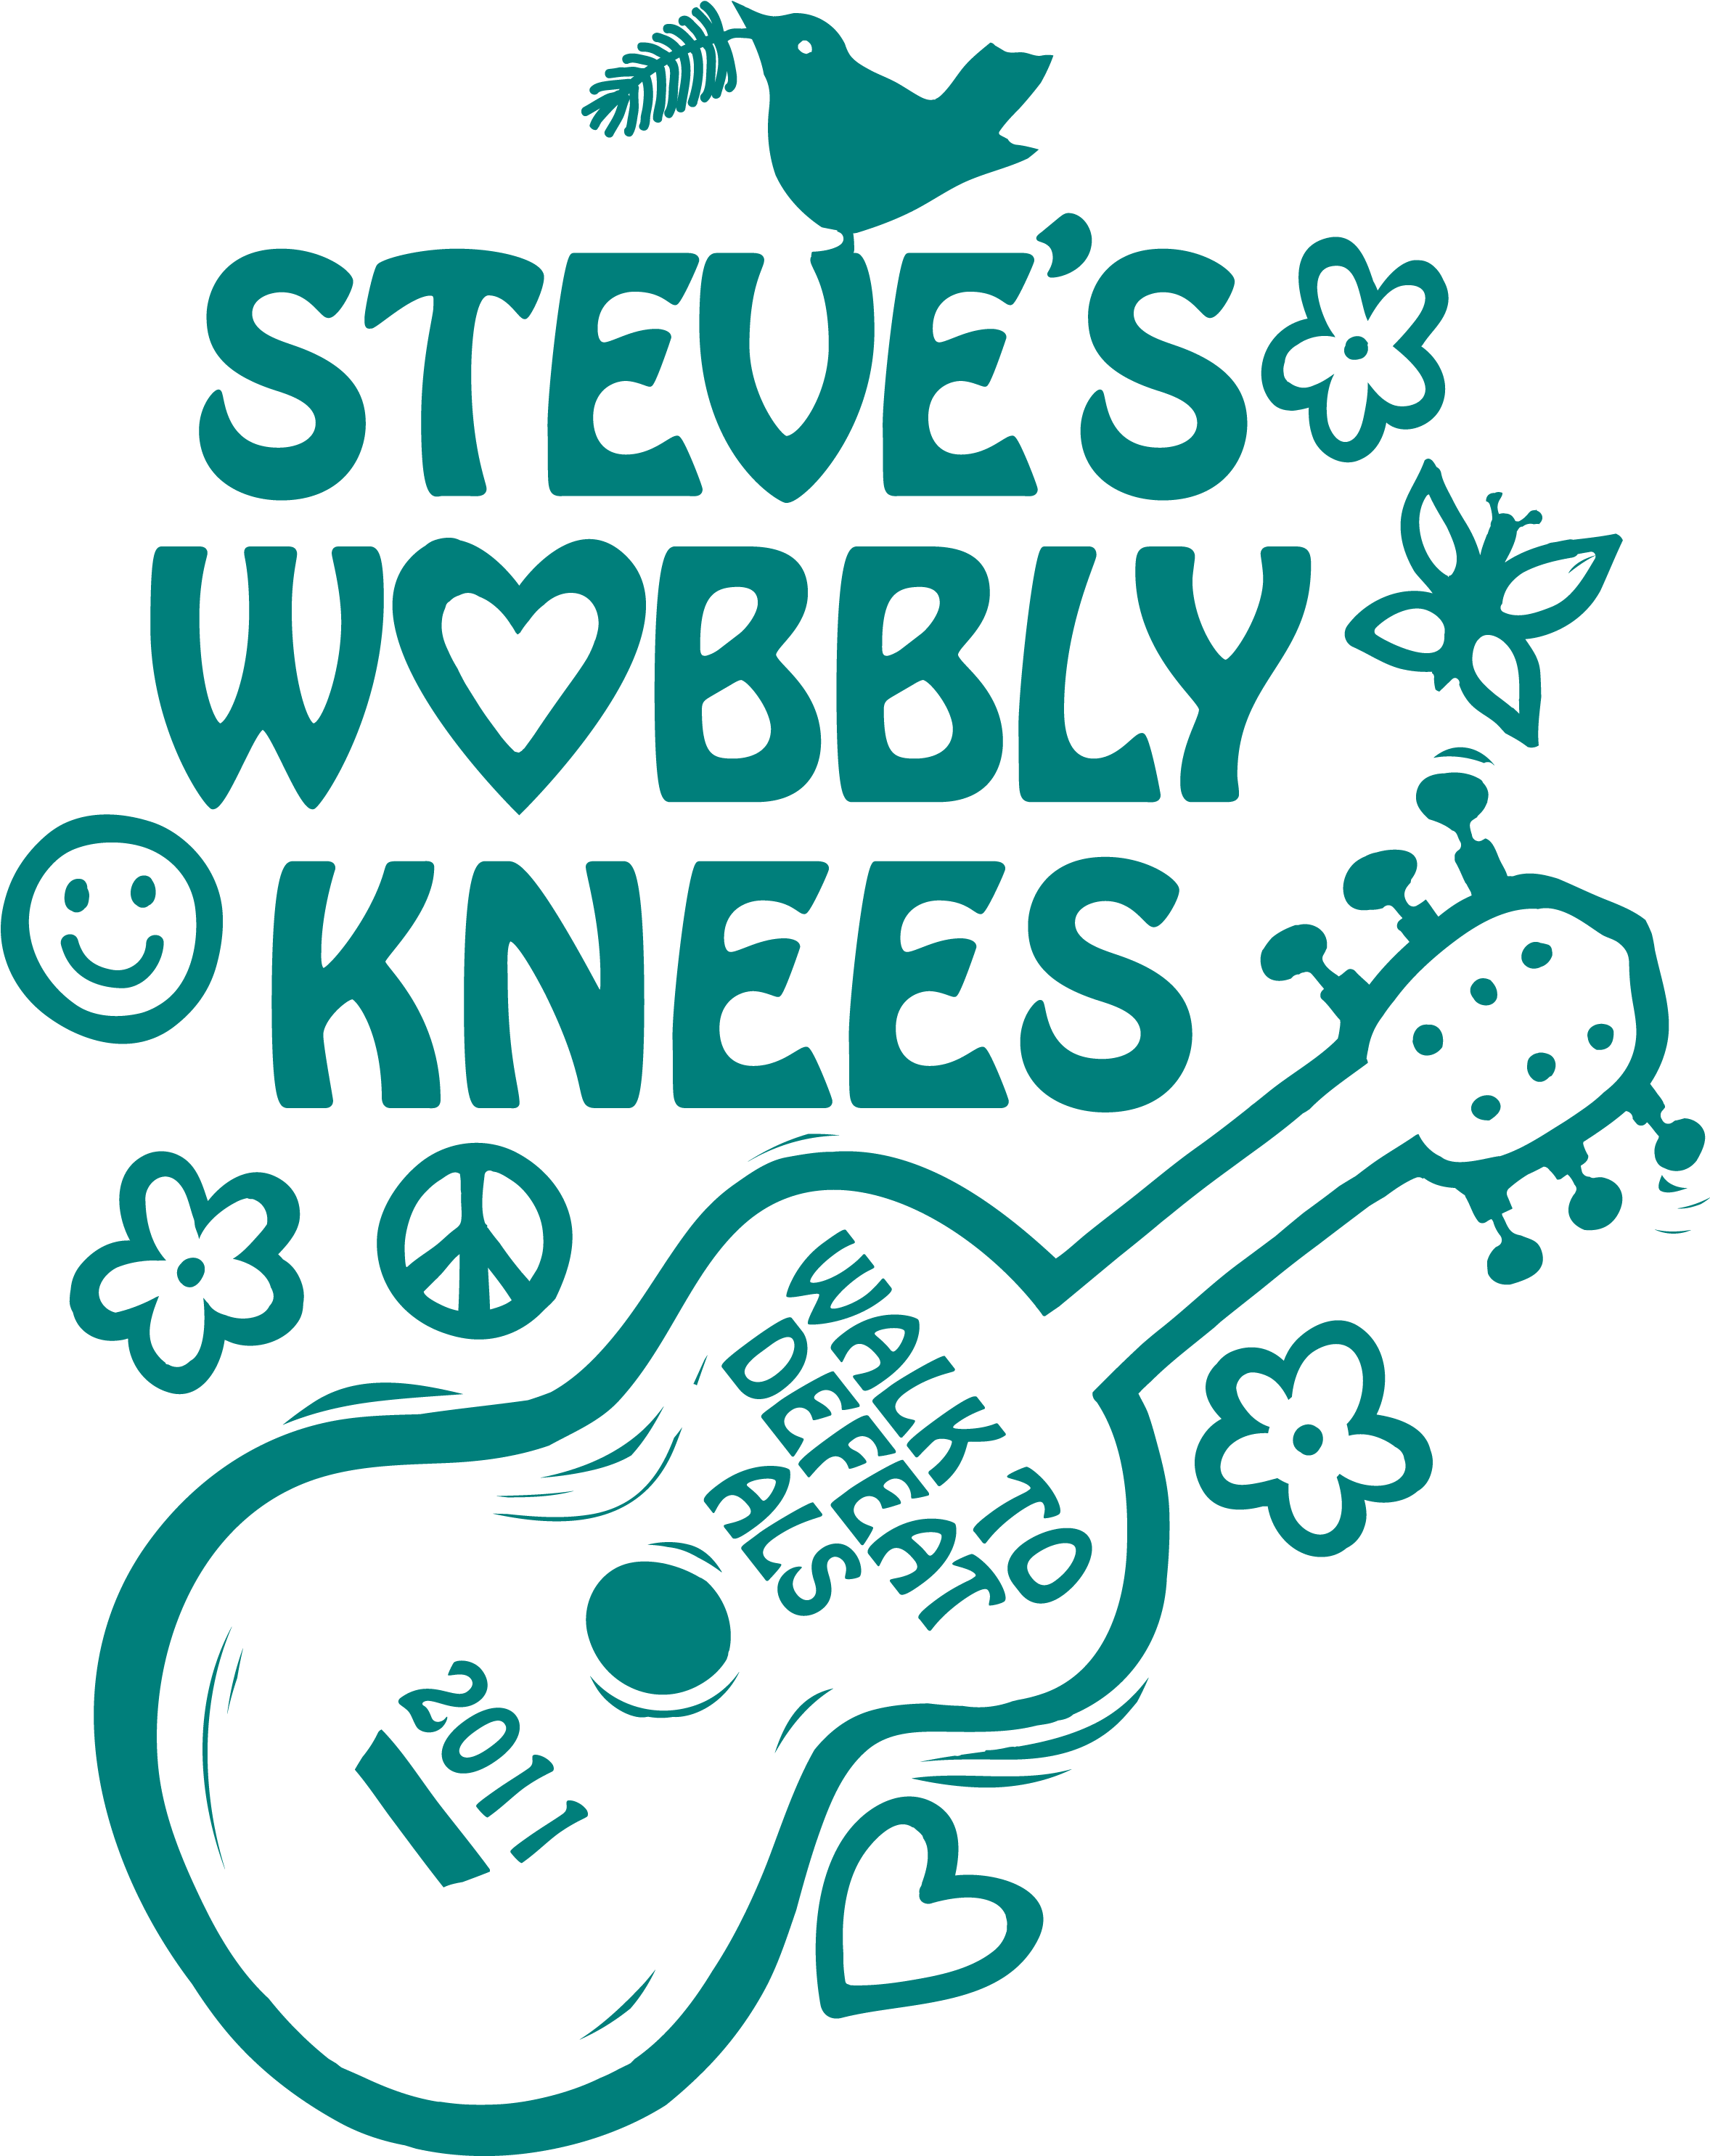 Wobbly Knees Guitar Graphic2011